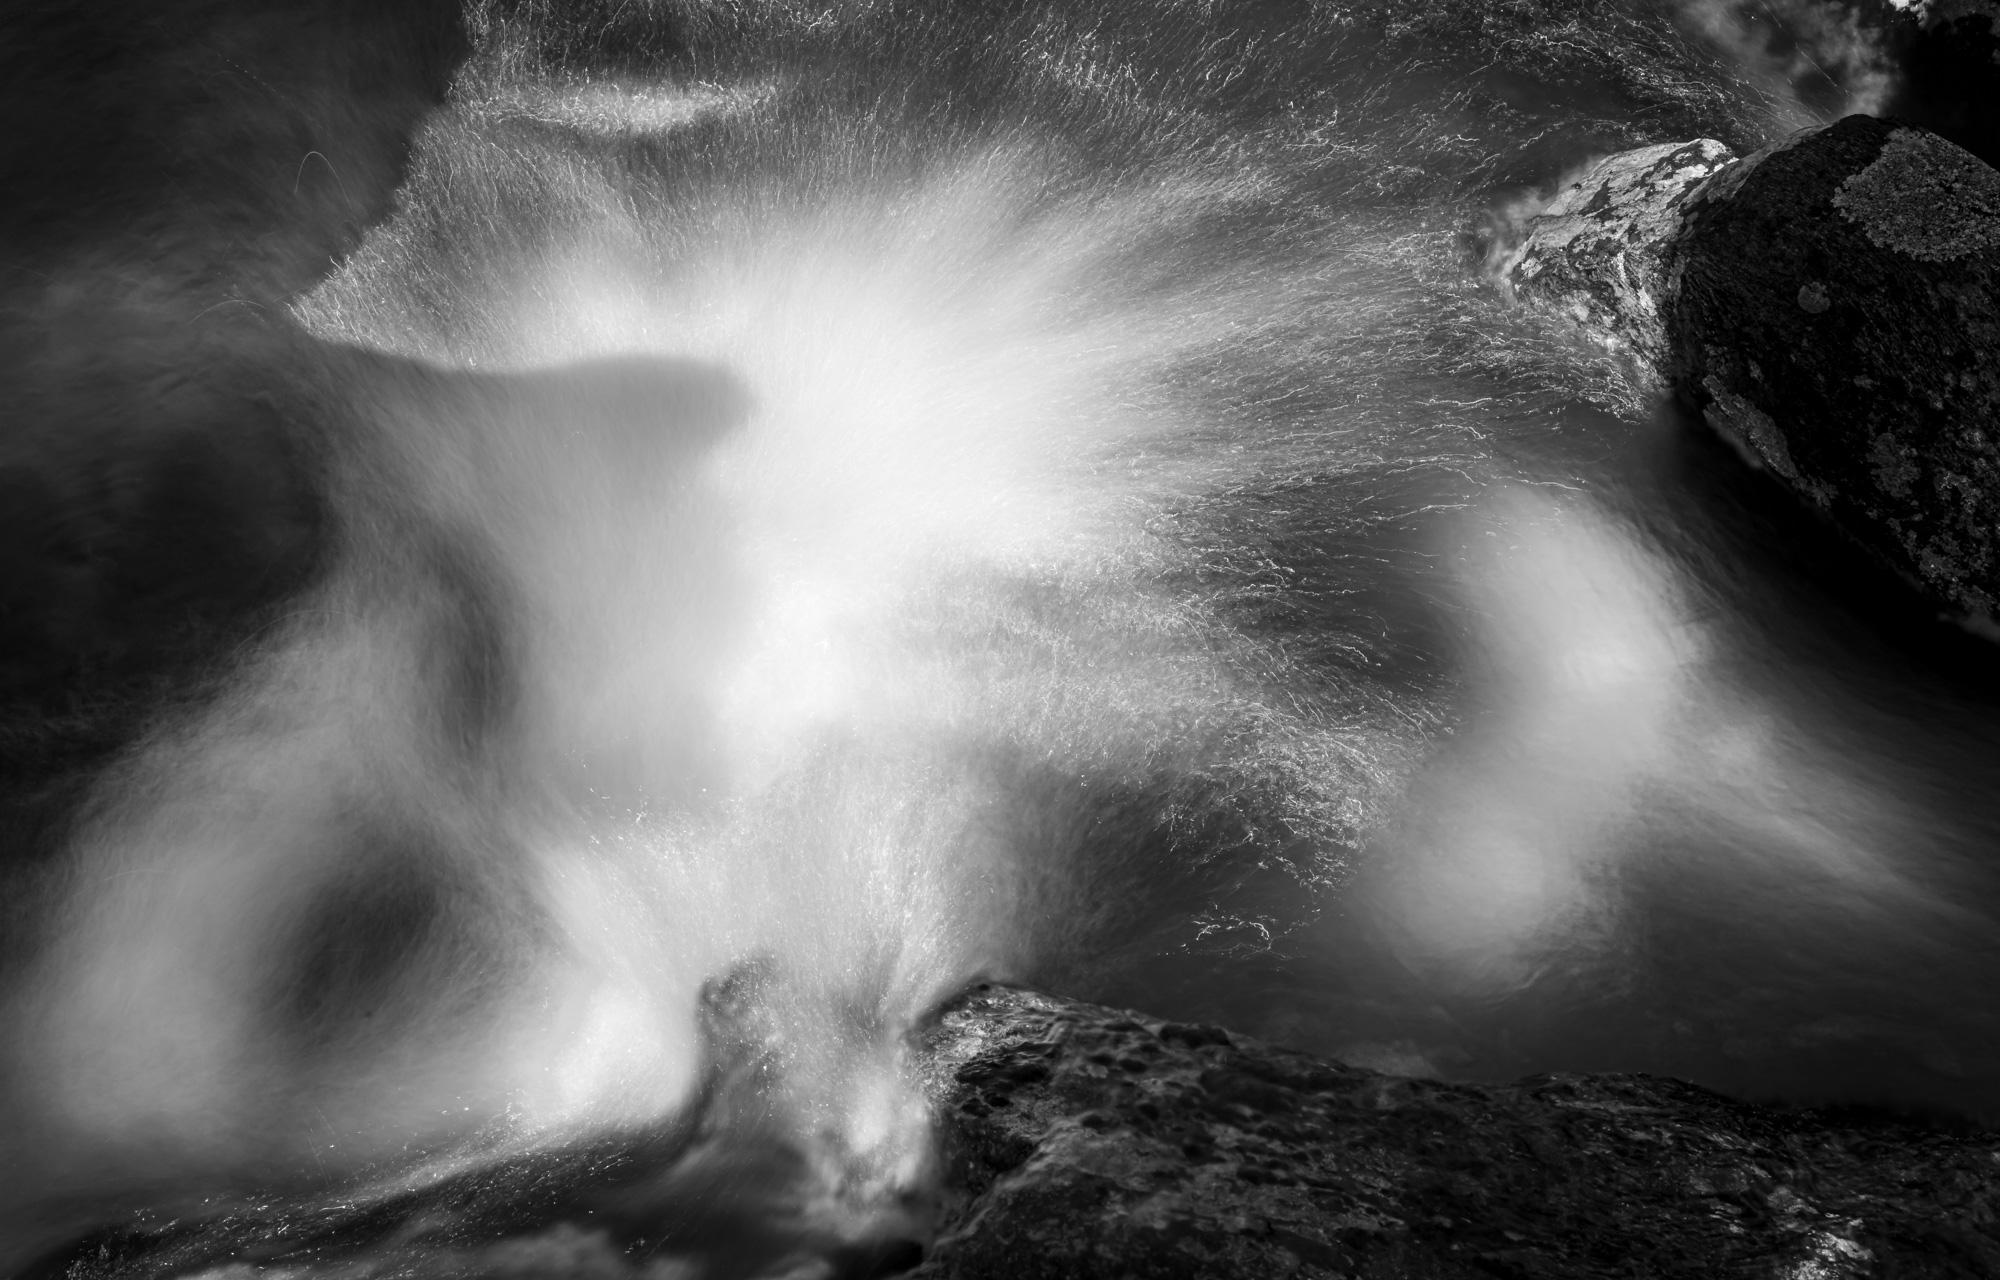 Howard Lewis Landscape Photograph - Limited Edition Black and White Photograph - Nature and Water Abstract